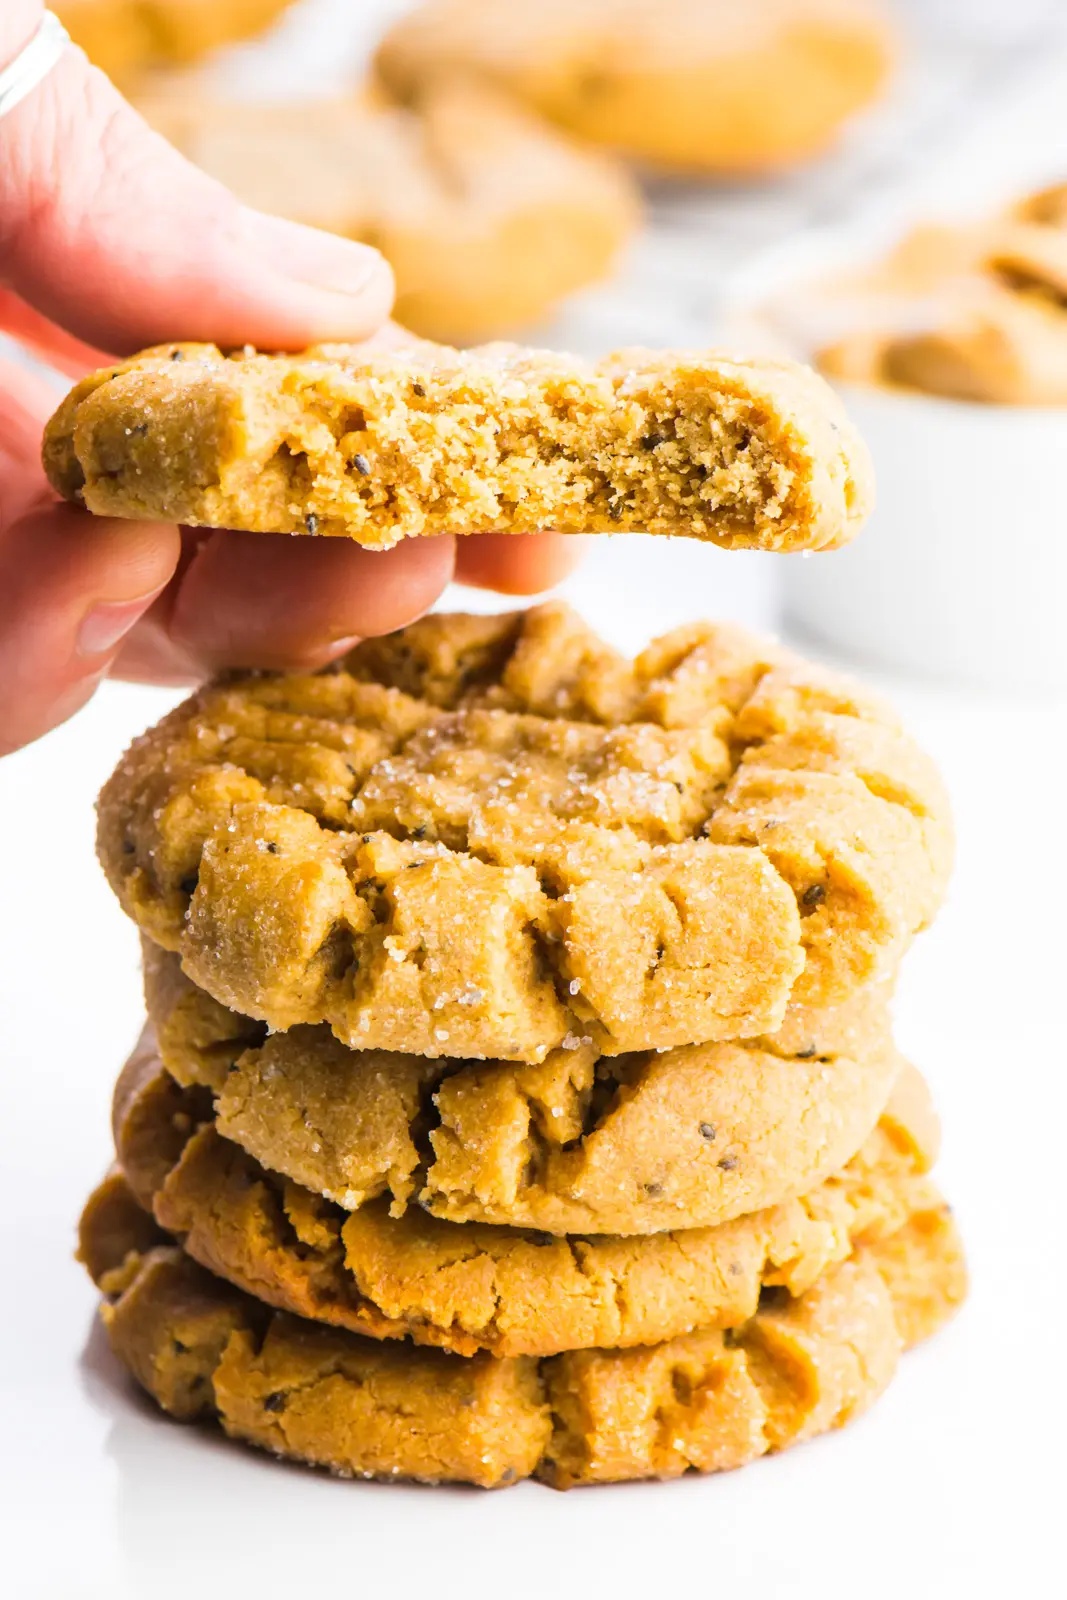 A stack of vegan cookies is sitting in the foreground. A hand is holding a cookie right above the stack and there's a bite taken out of that cookie.